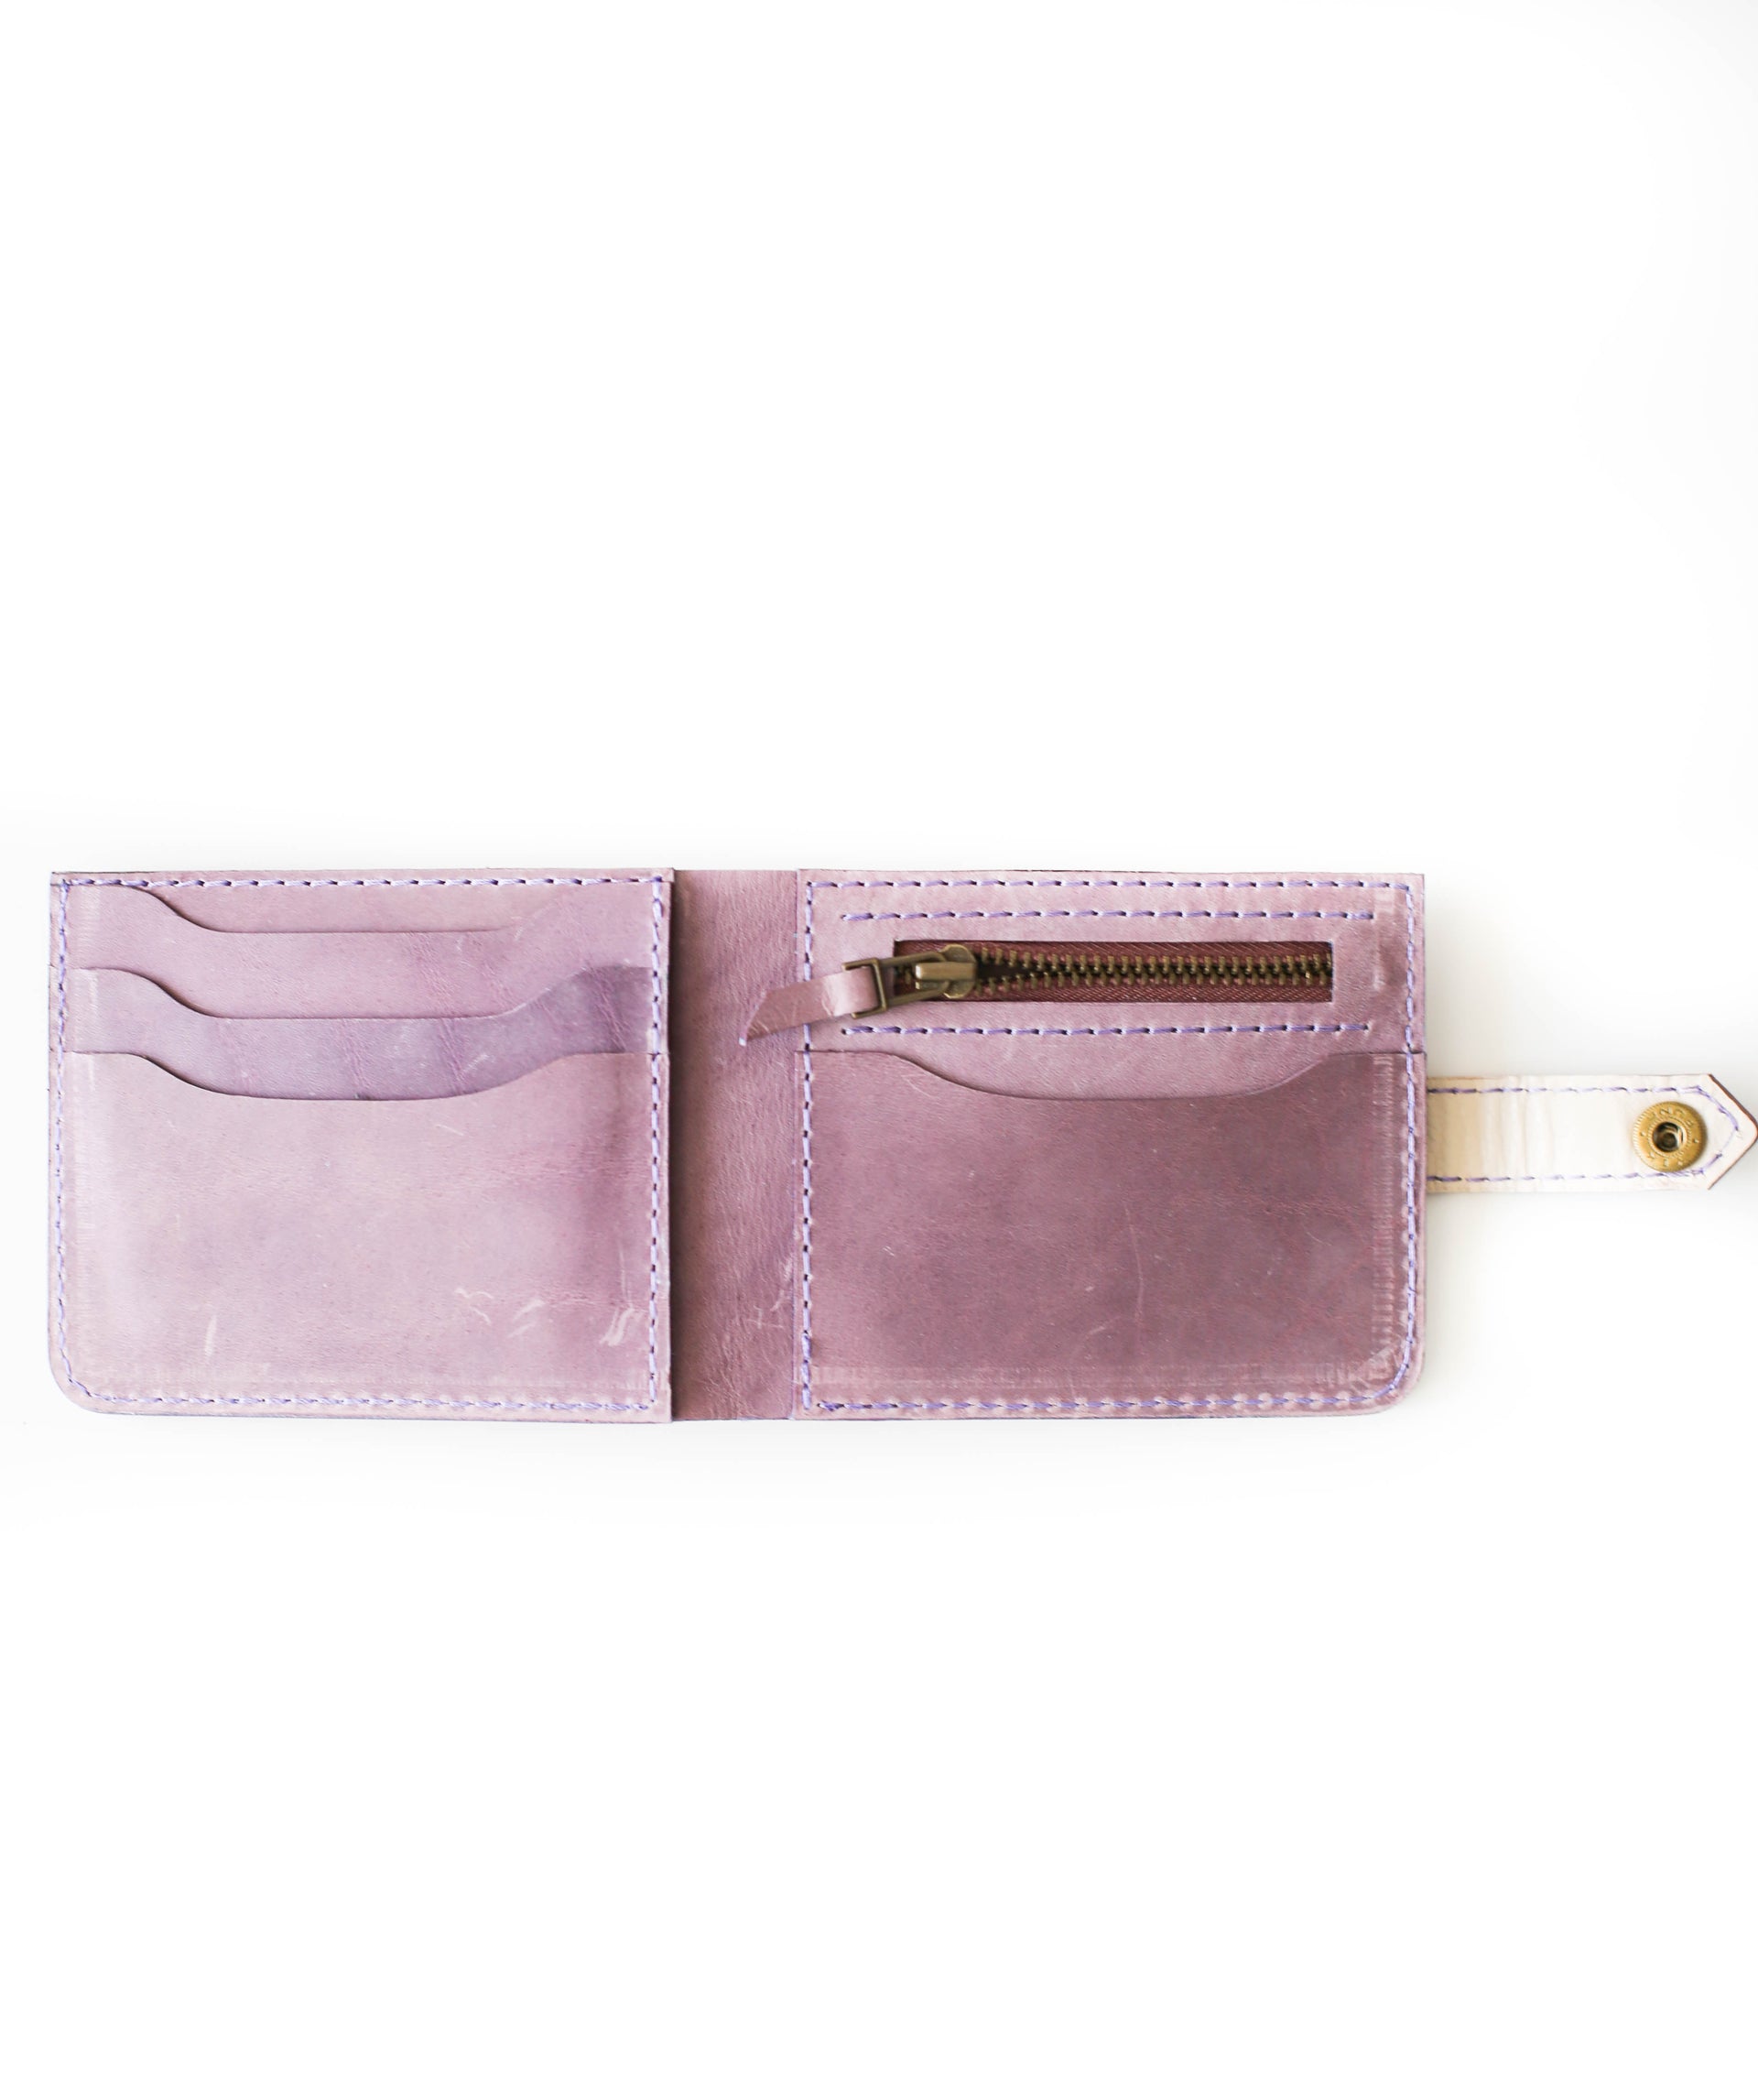 Small Leather Wallet womens